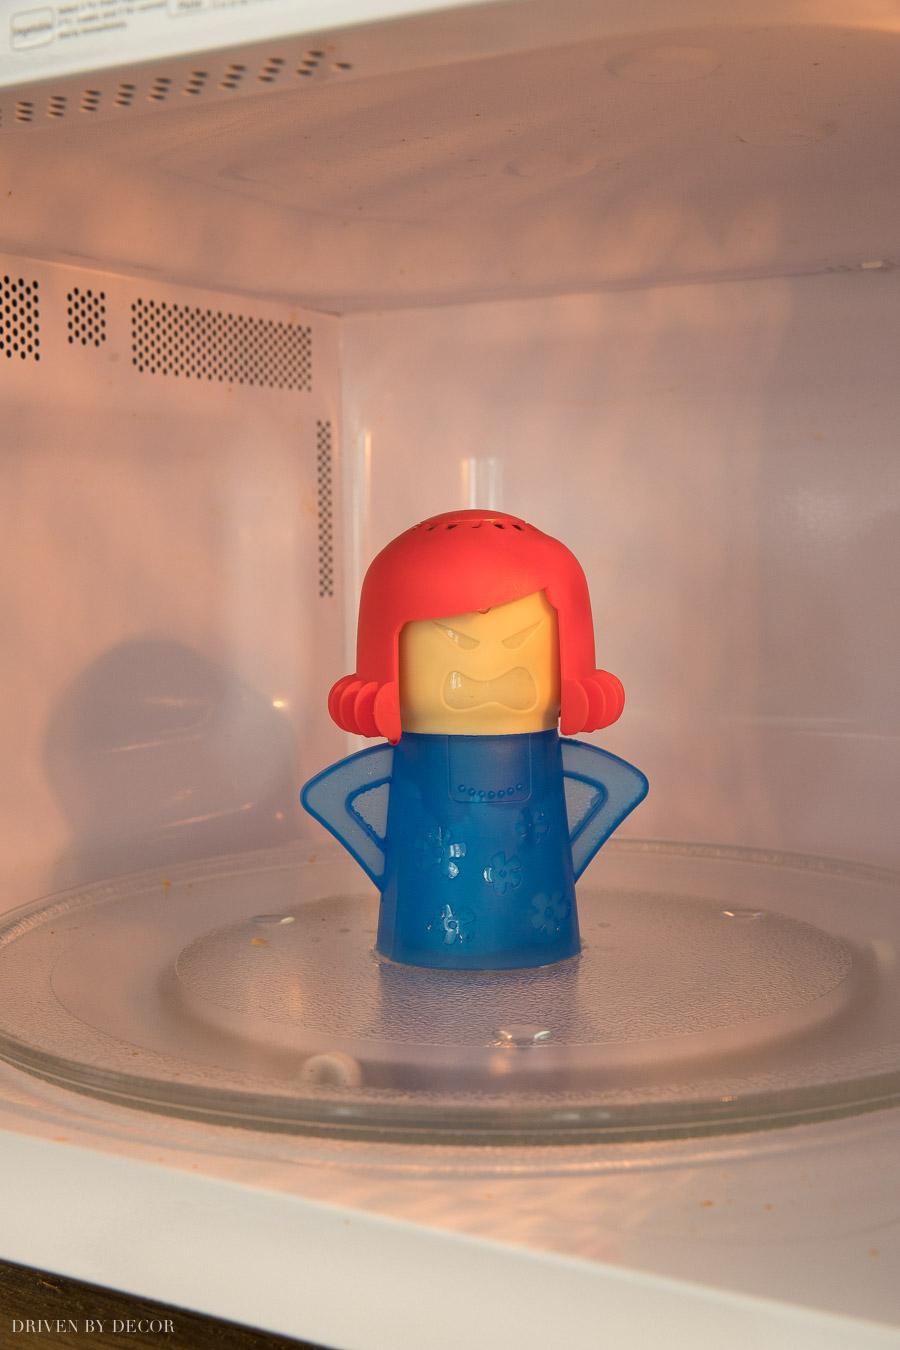 Such a fun stocking stuffer - love this Angry Mama microwave cleaner!